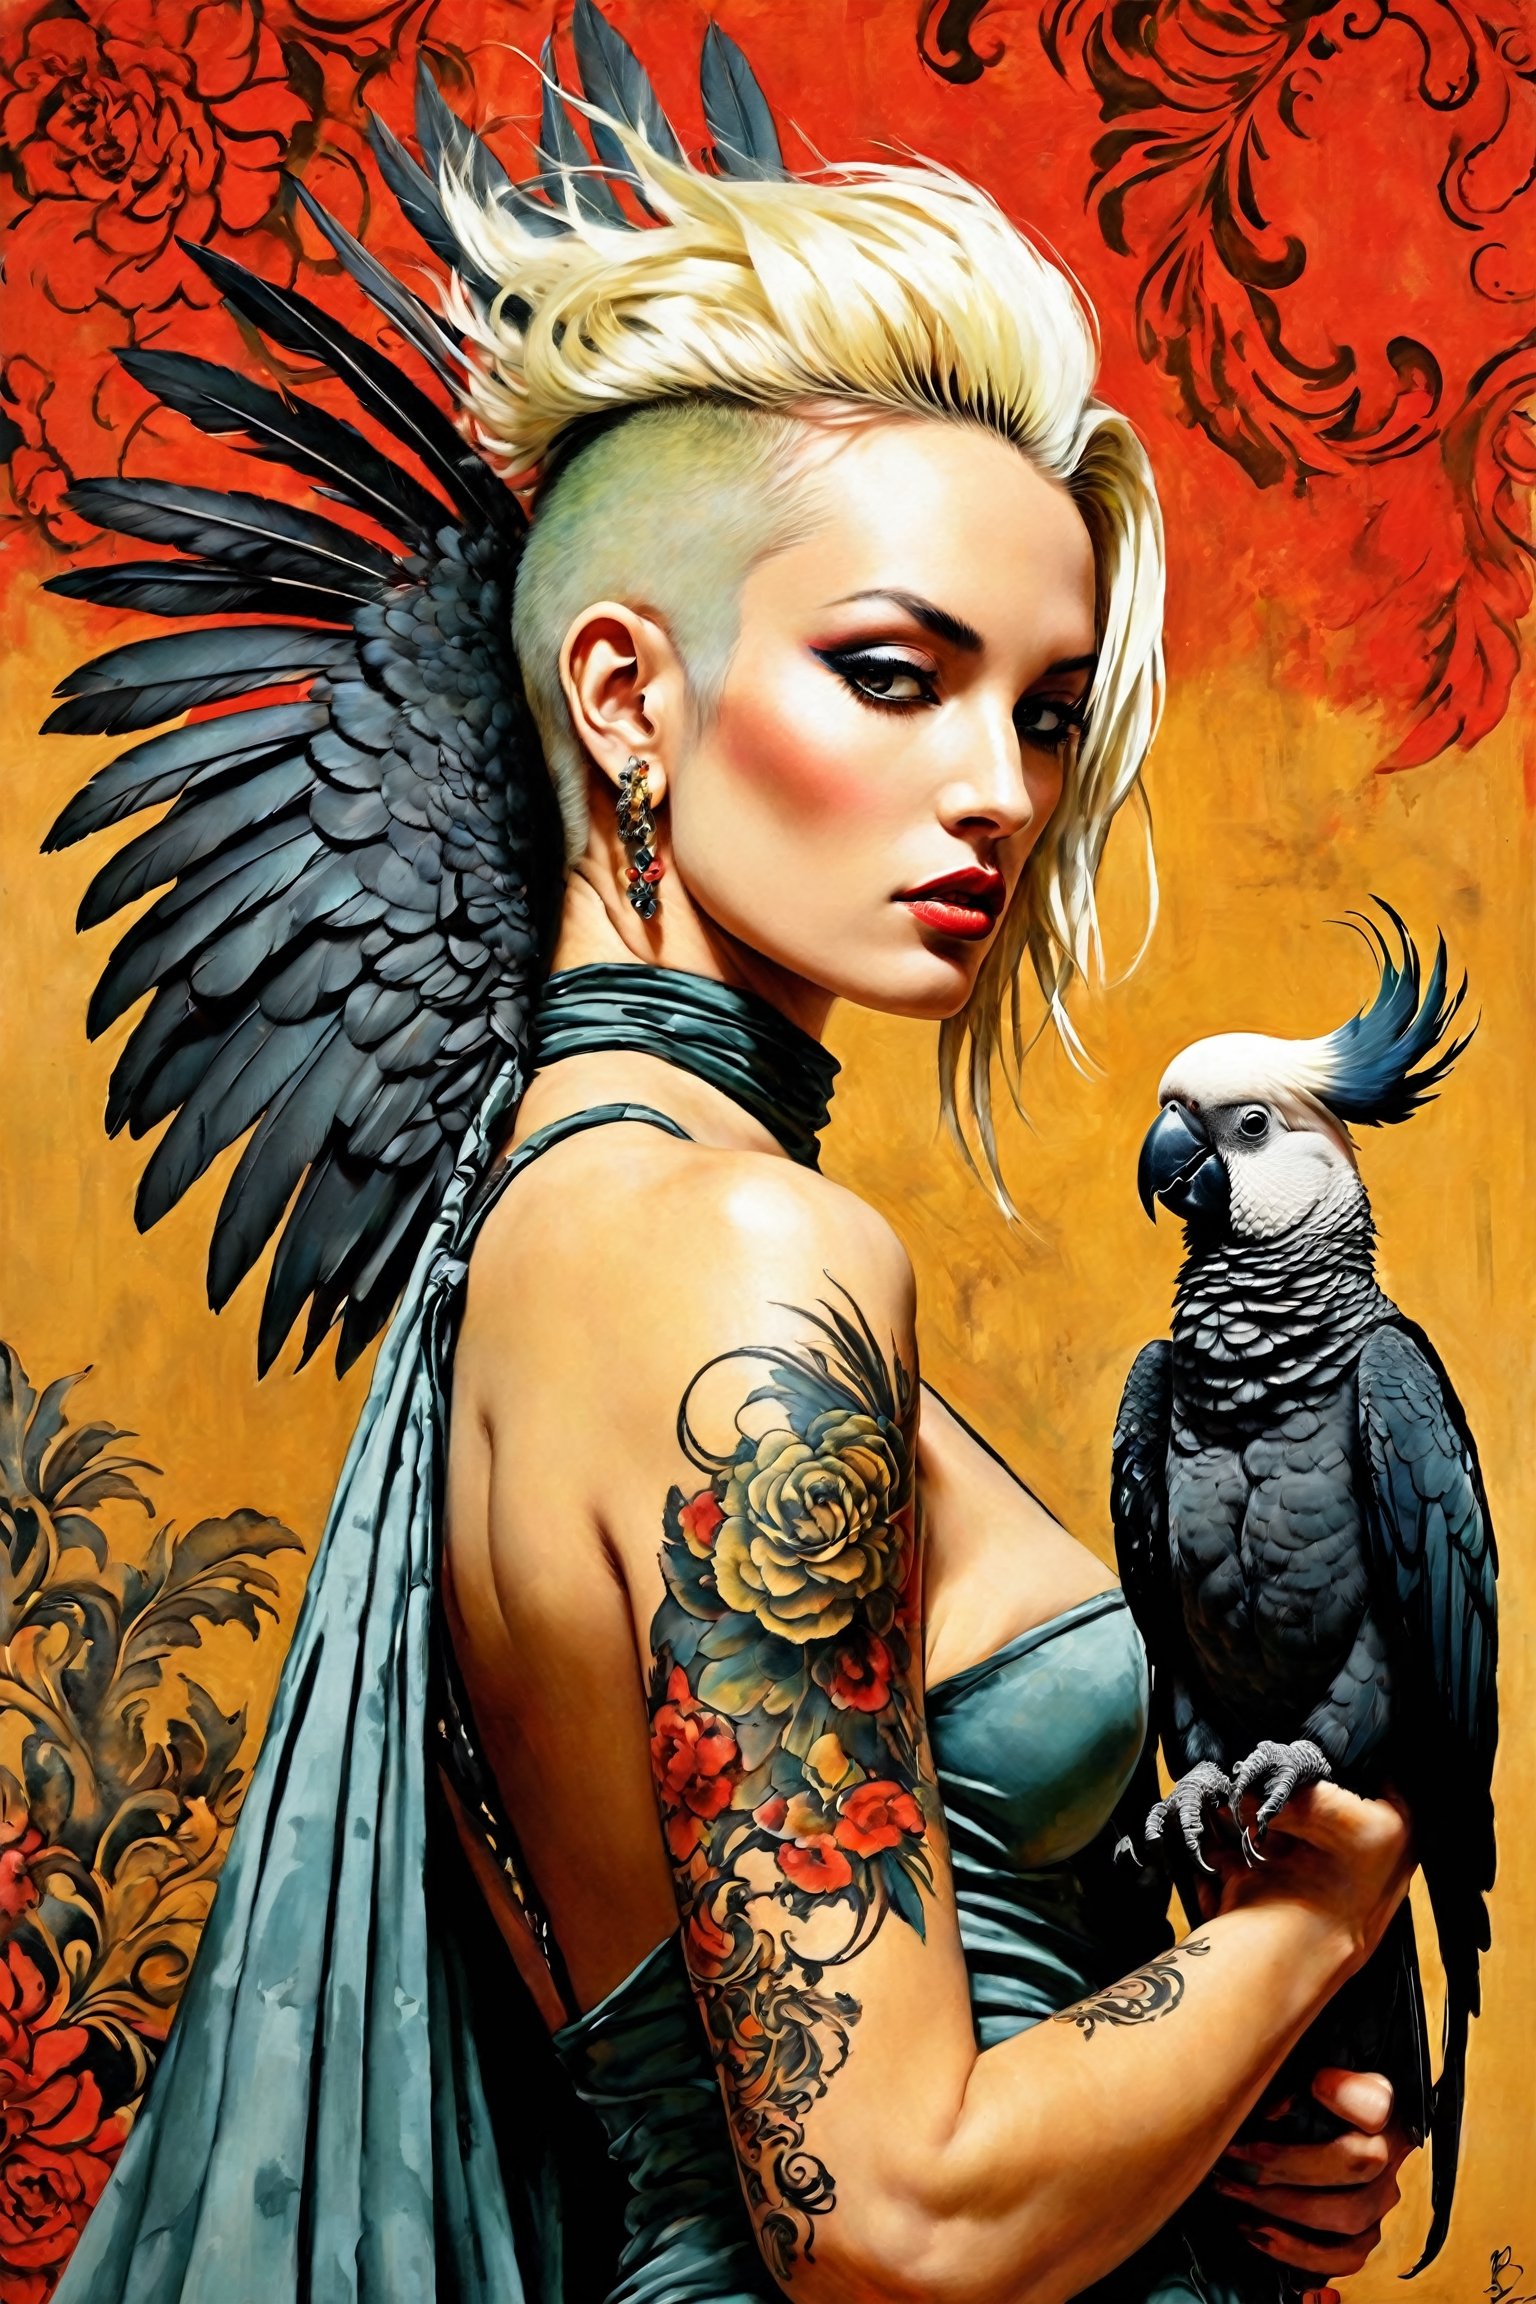 spanish women, black cockatoo, sulphur crested cockatoo, fashionistas, baroque style, art by sergio toppi, art design by sergio toppi, tattoo by ed hardy, shaved hair, neck tattoos andy warhol, heavily muscled, biceps,glam, women, military poster style, ,more detail XL,close up,Oil painting, 8k, highly detailed, in the style of esao andrews,Vogue style,